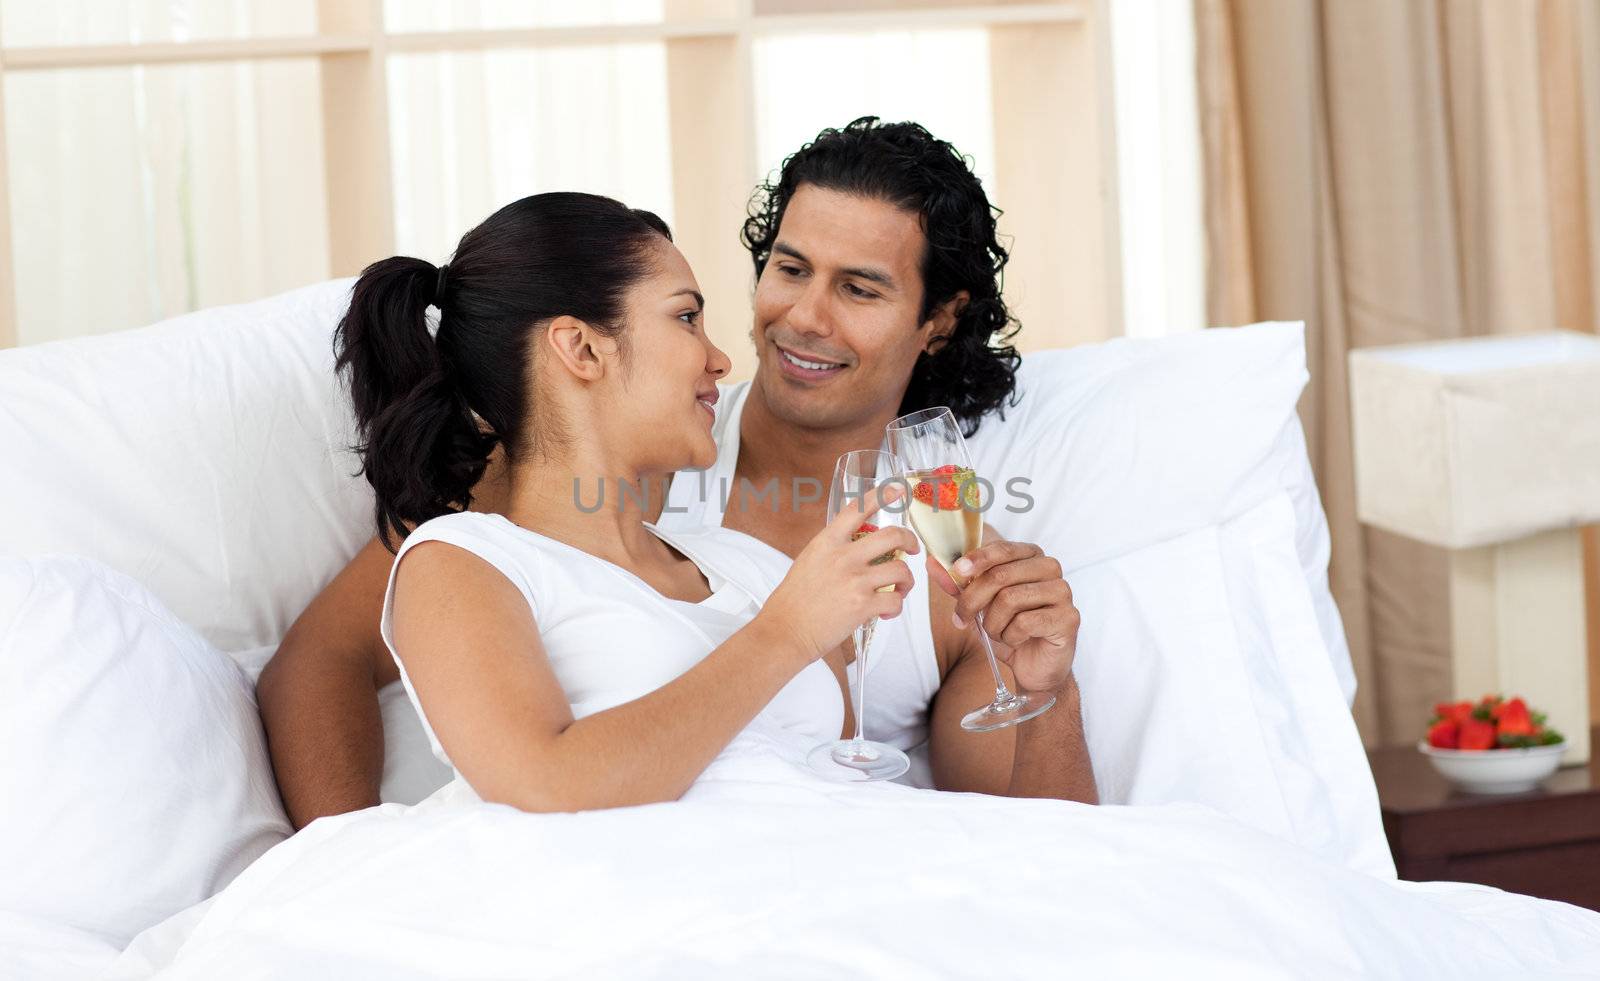 Lovers toasting with Champagne in the bedroom by Wavebreakmedia